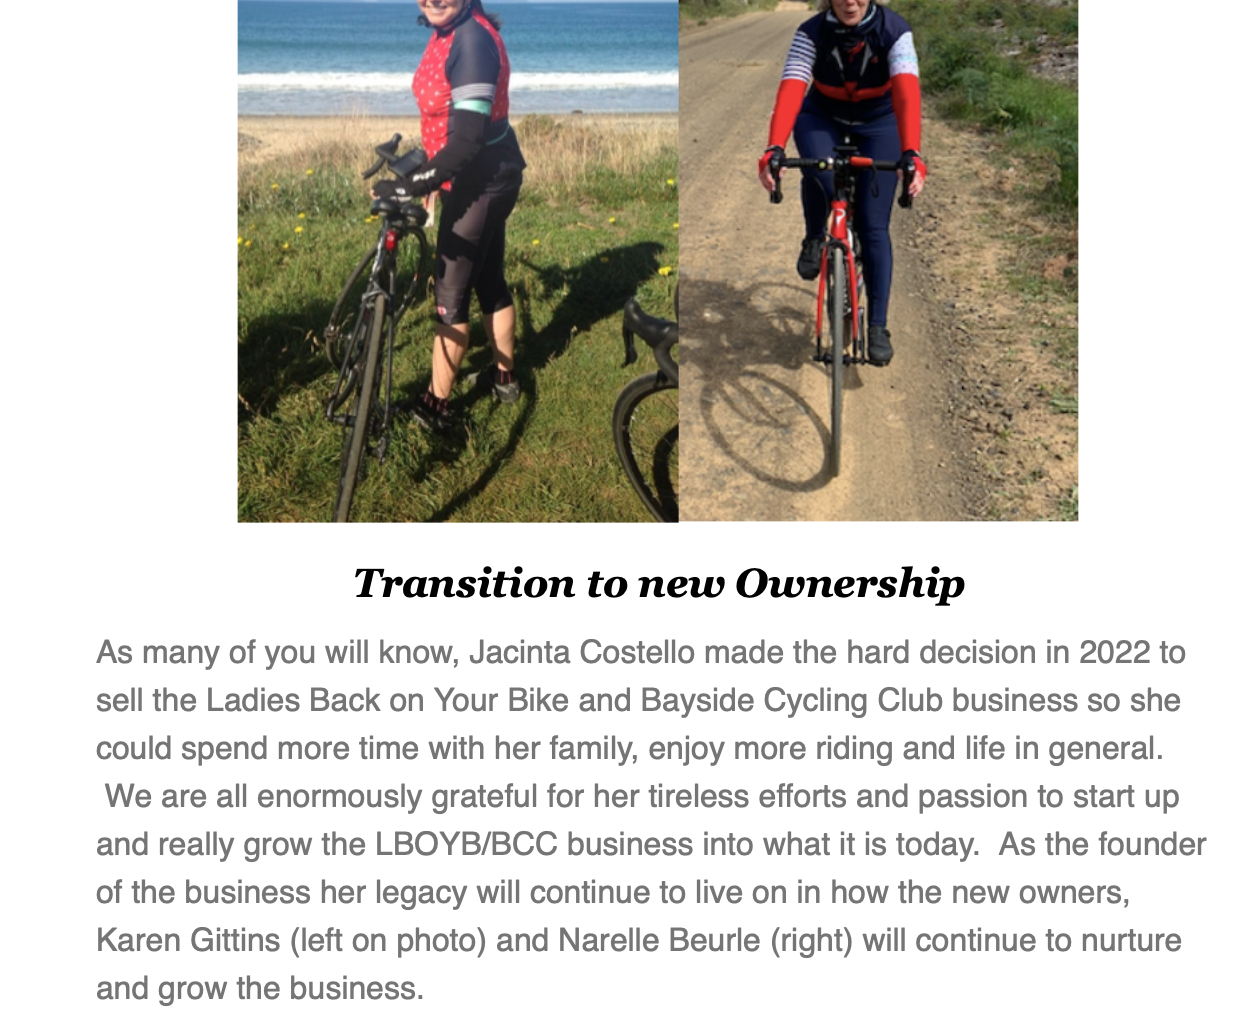 LBOYB/BCC JANUARY 2023 NEWSLETTER - Transition to new ownership & Summer is here again!